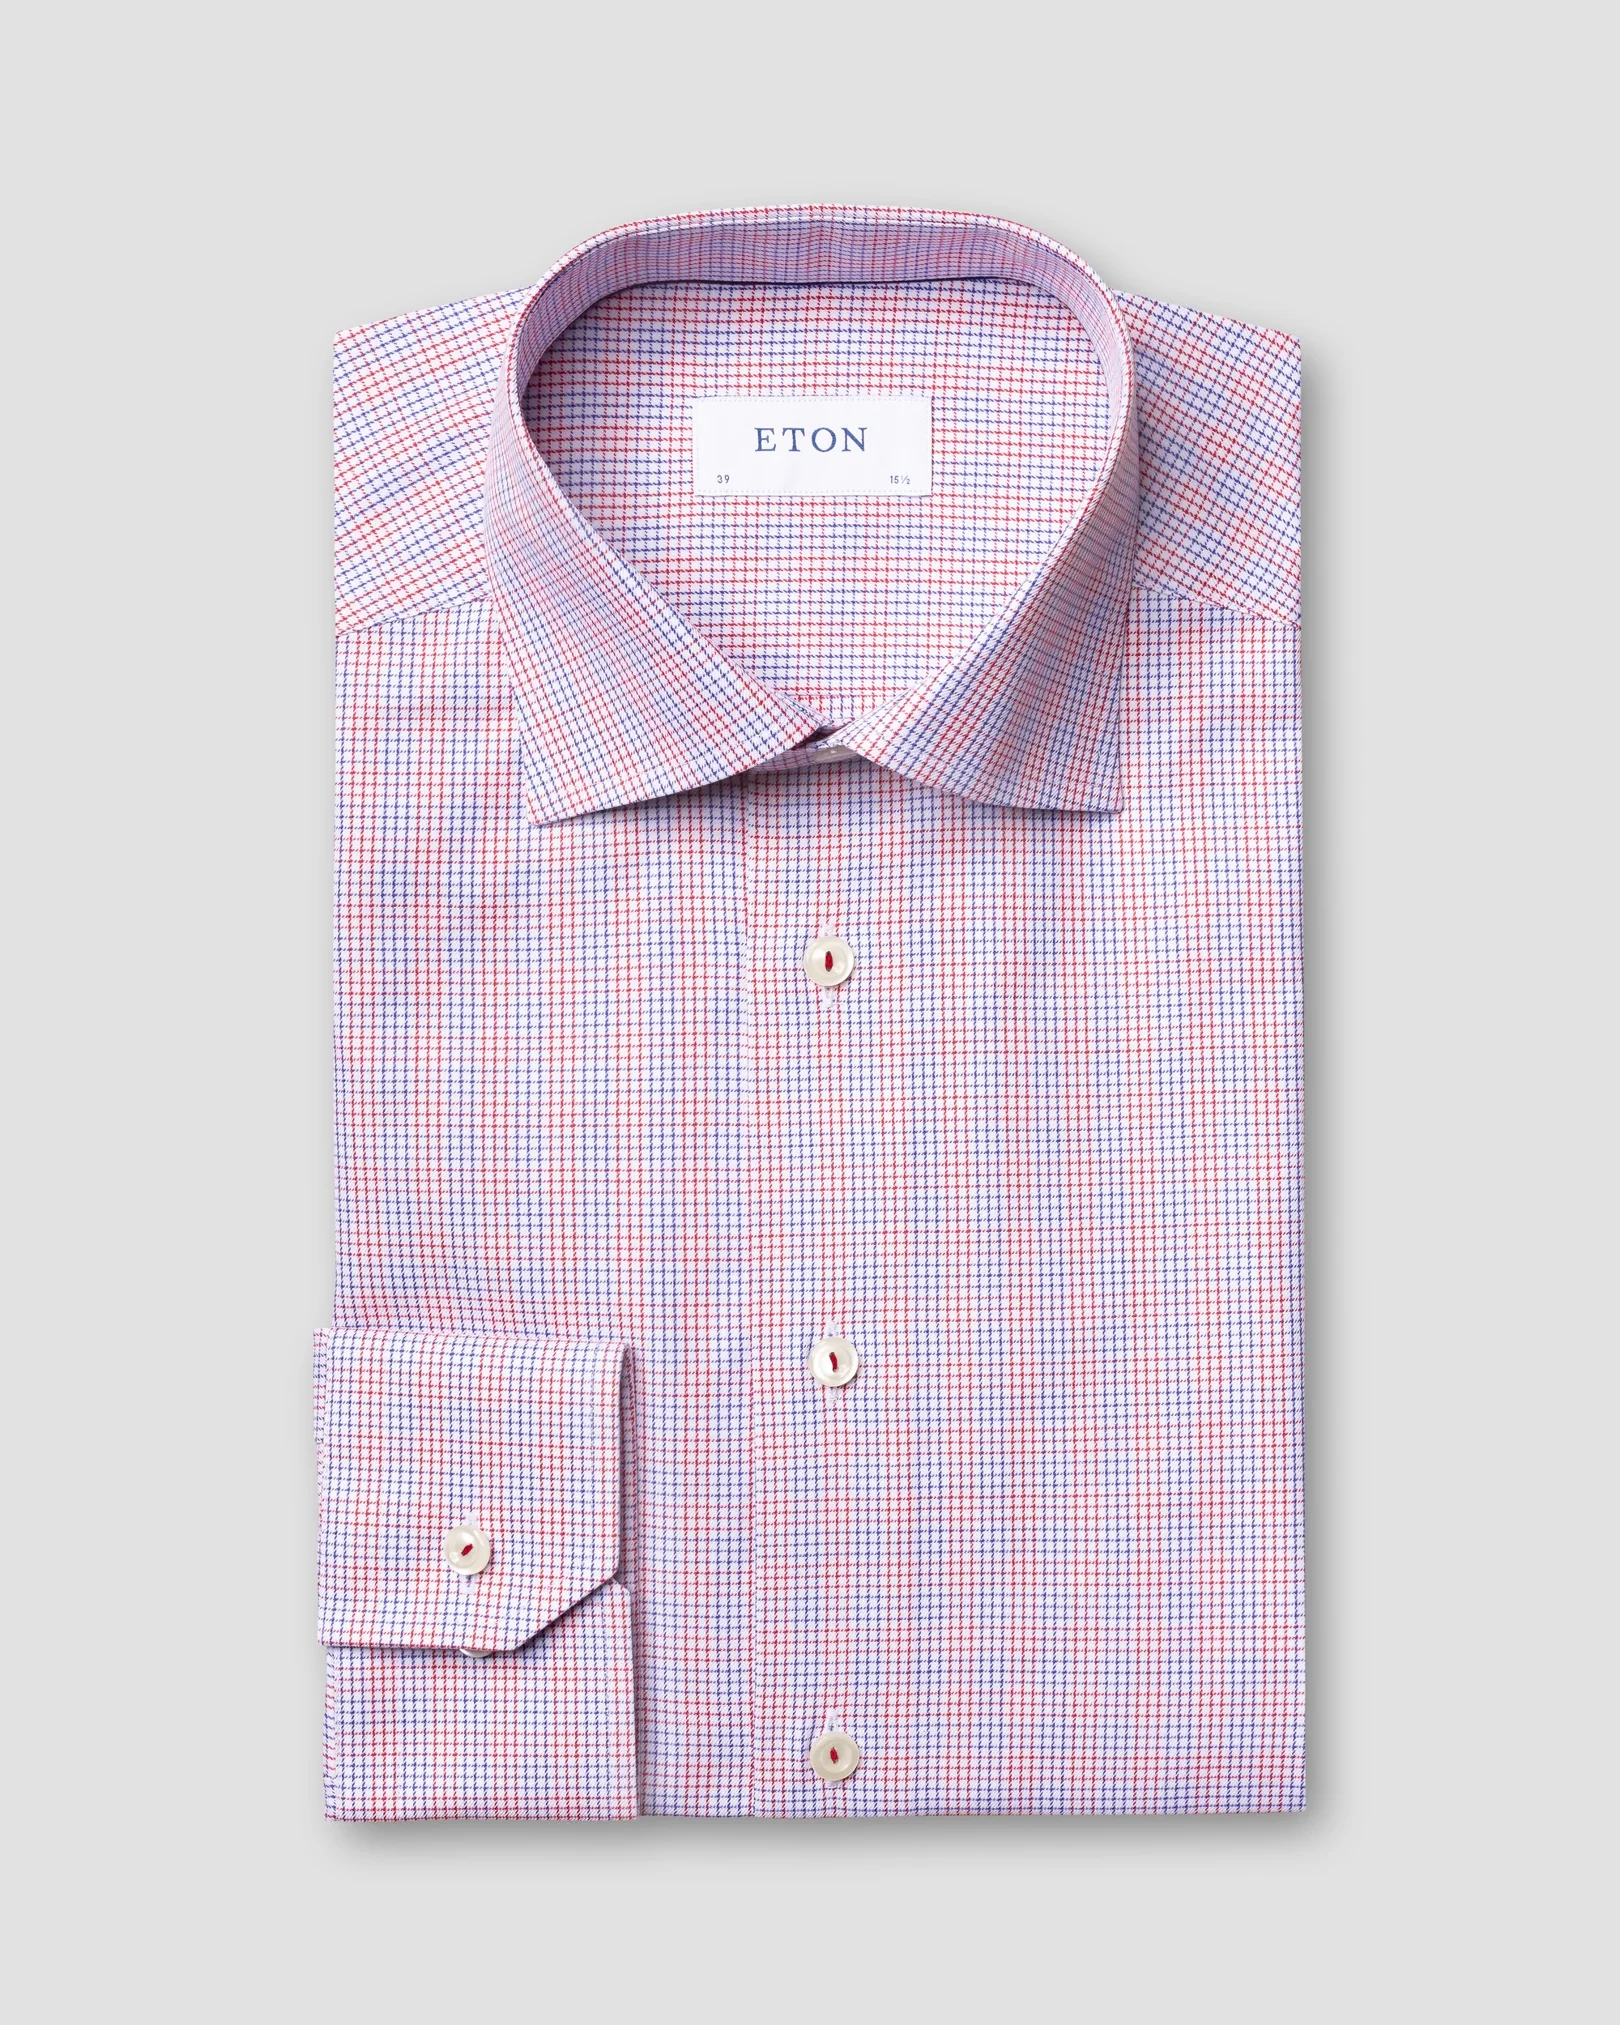 Eton - red and blue double checked twill shirt cut away